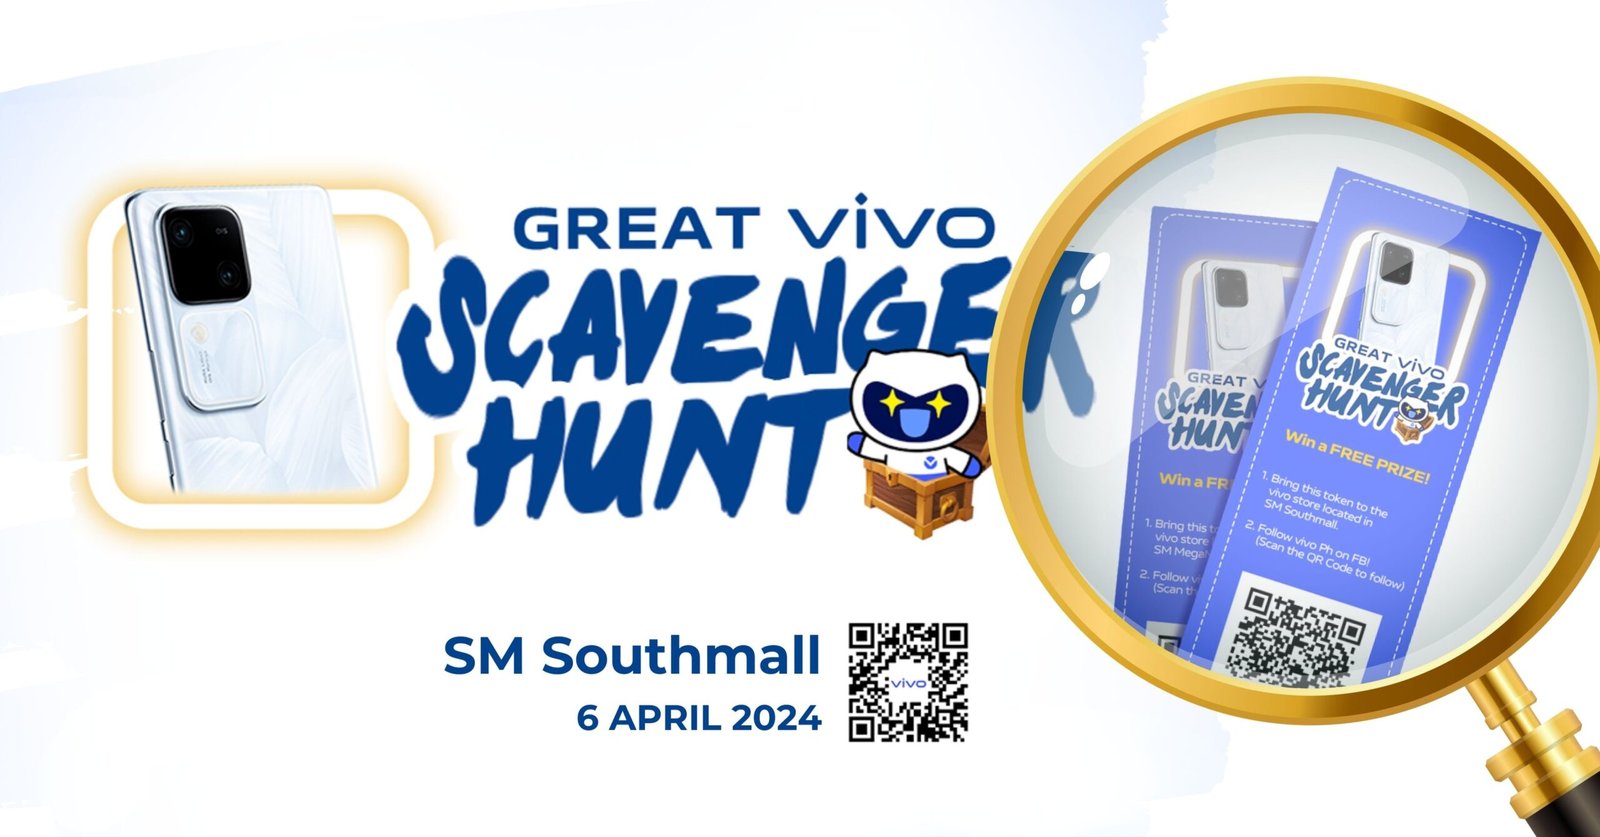 Great vivo Scavenger Hunt coming to SM Southmall on April 6